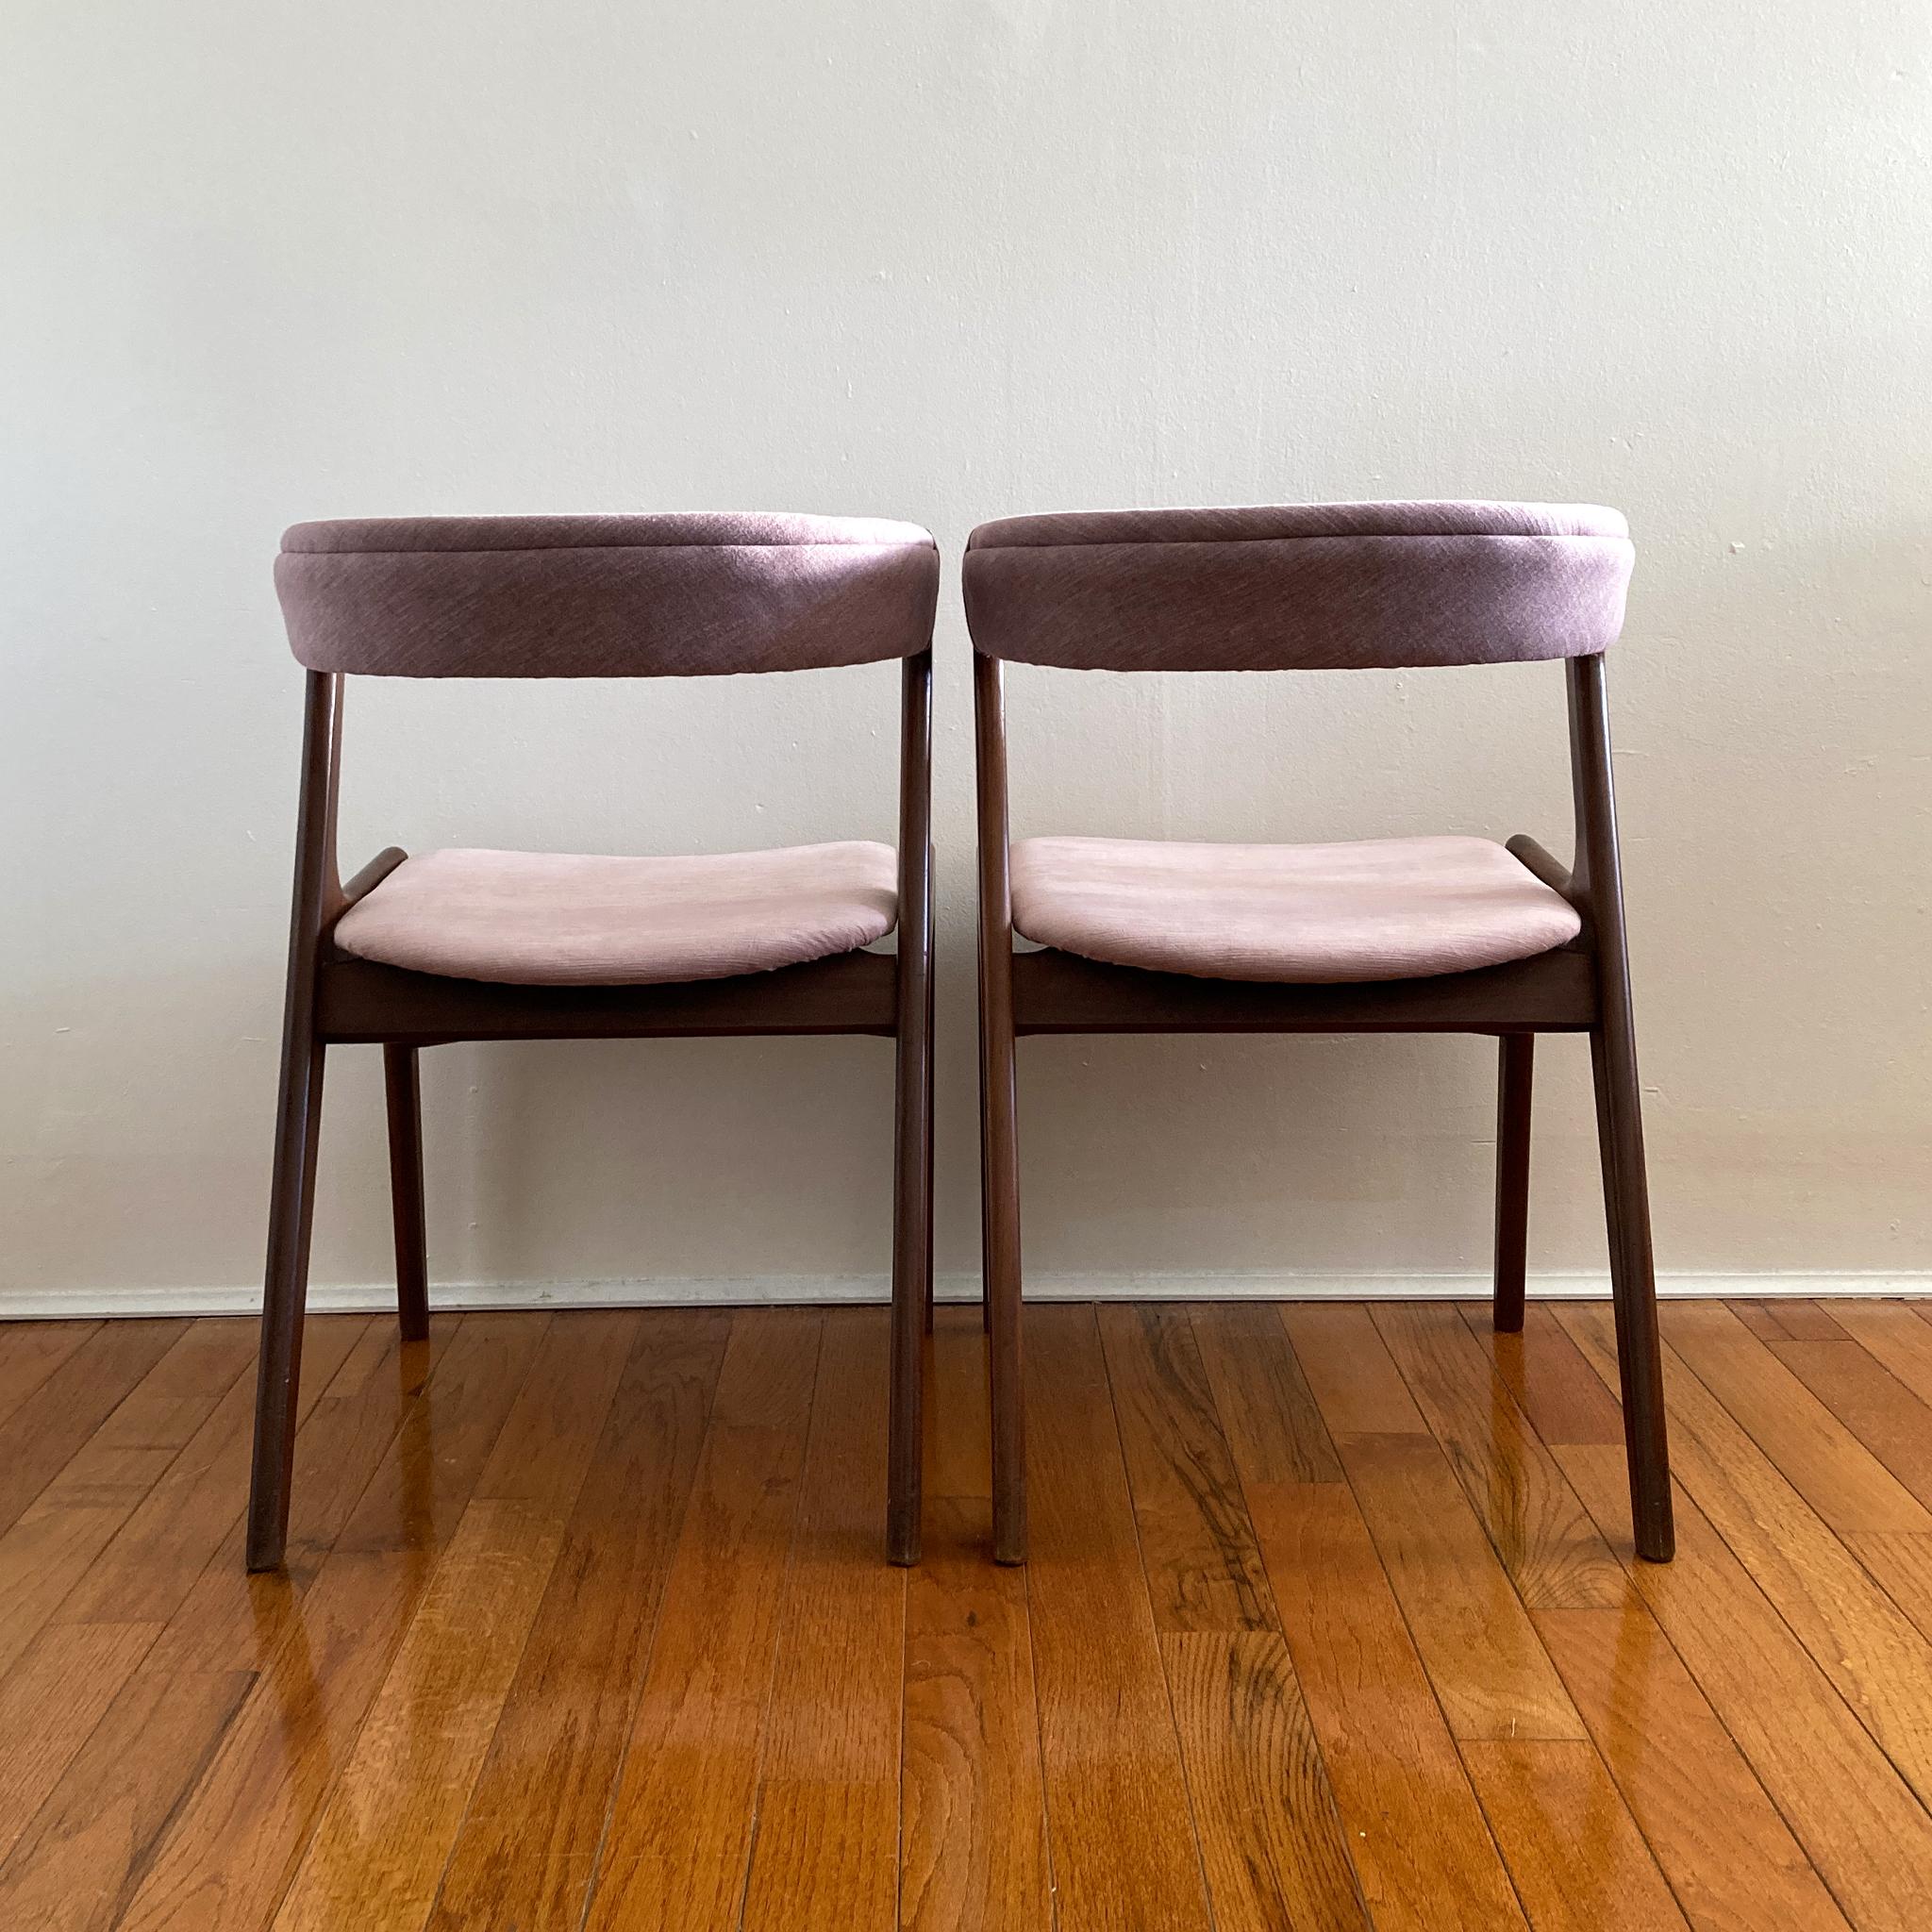 Danish Kai Kristiansen Mauve Pink Curved Back Dining Side Chairs, 1960s, Pair of Two For Sale